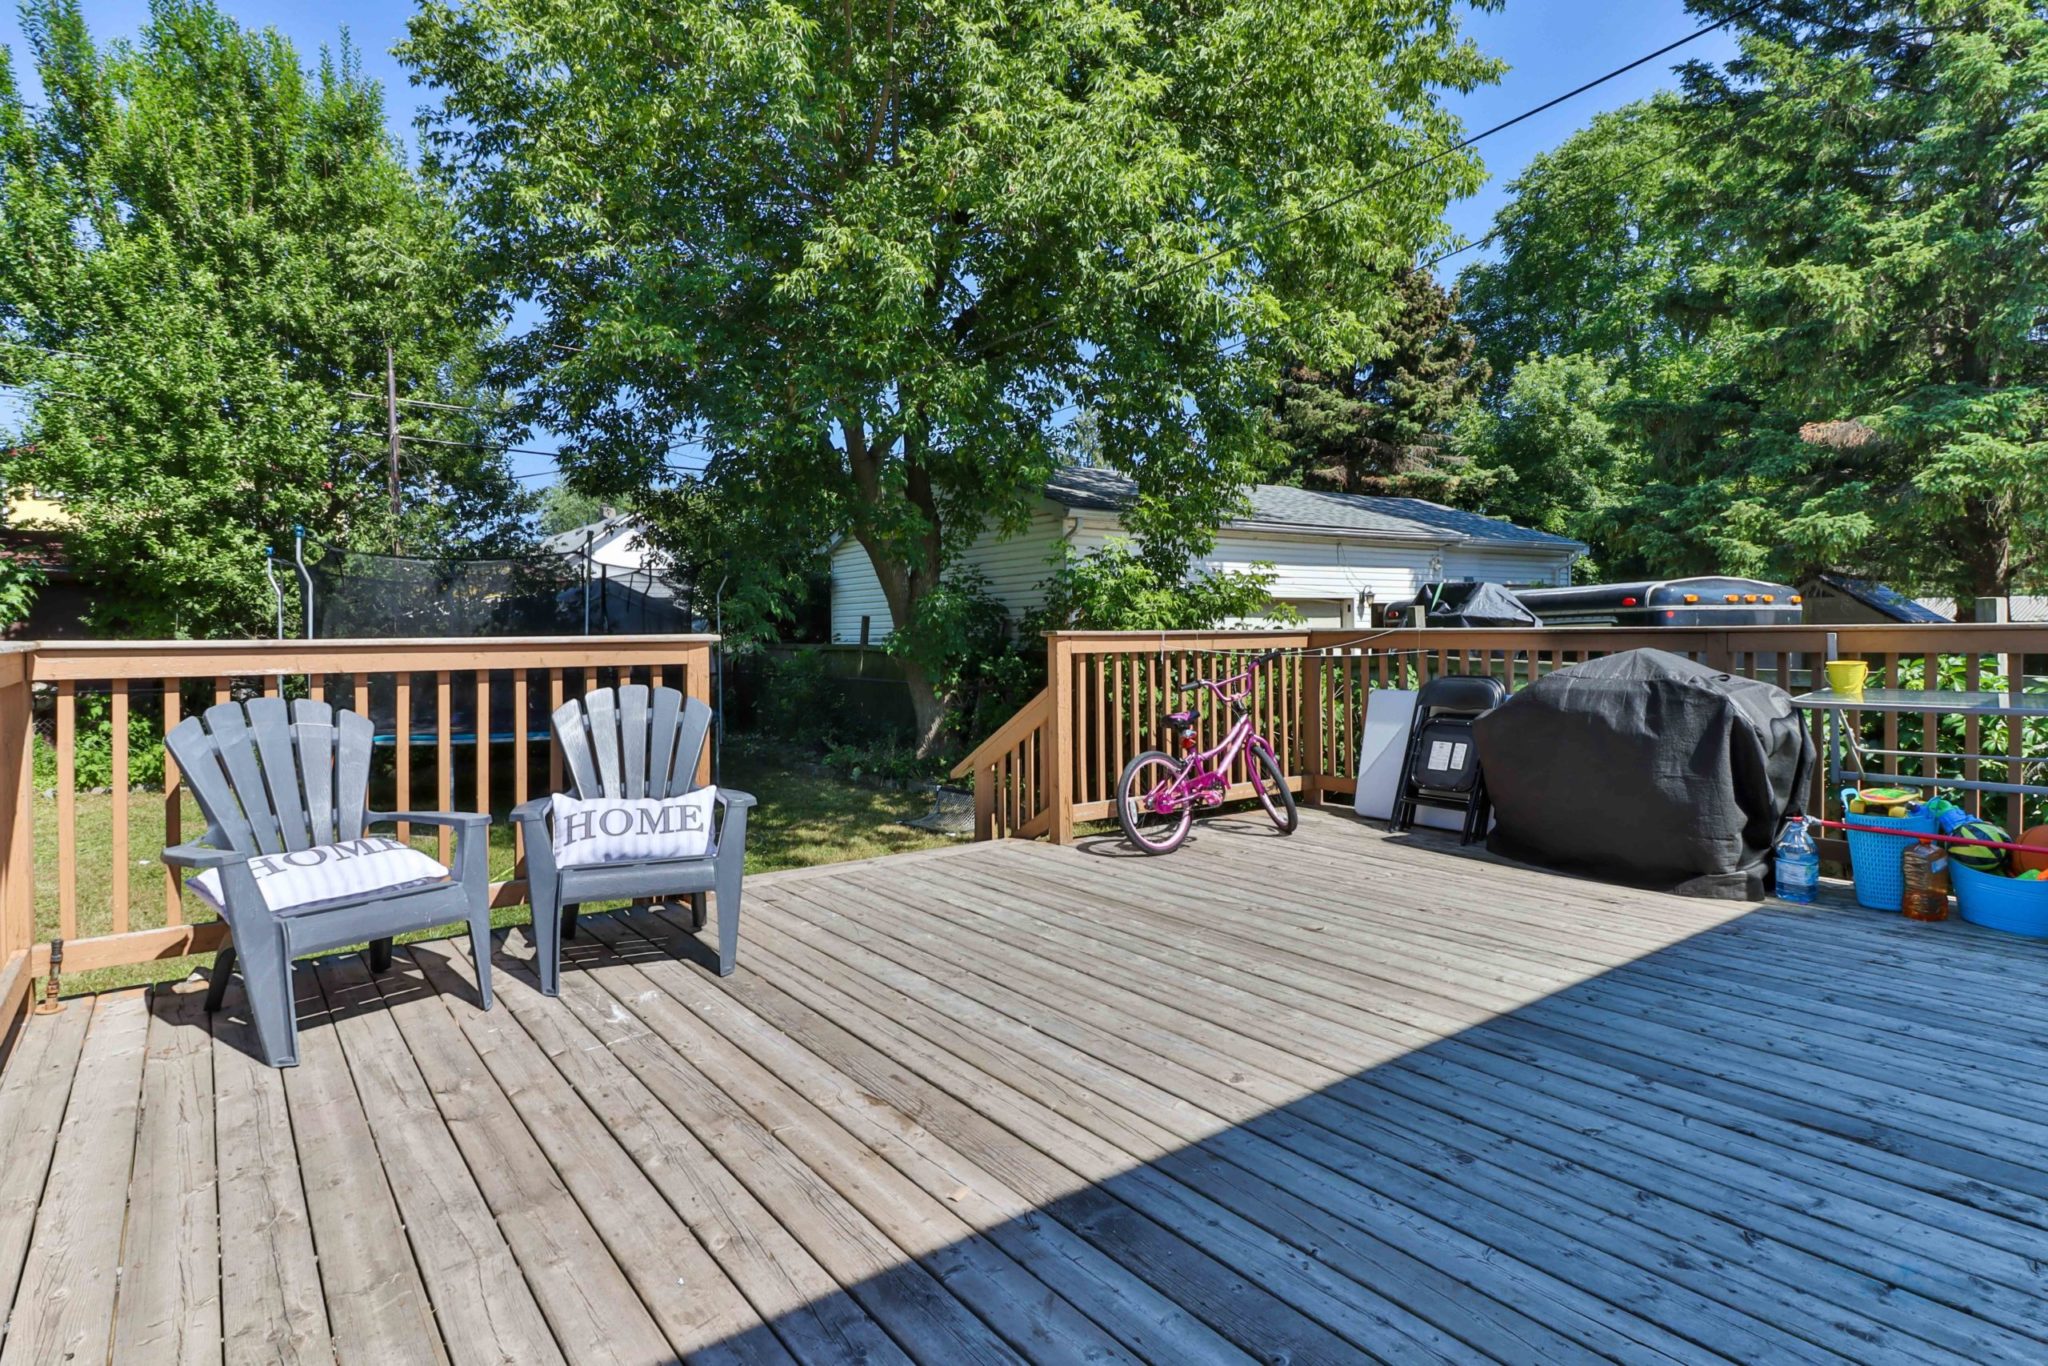 Huge wooden deck with chairs, covered BBQ and bicycle.